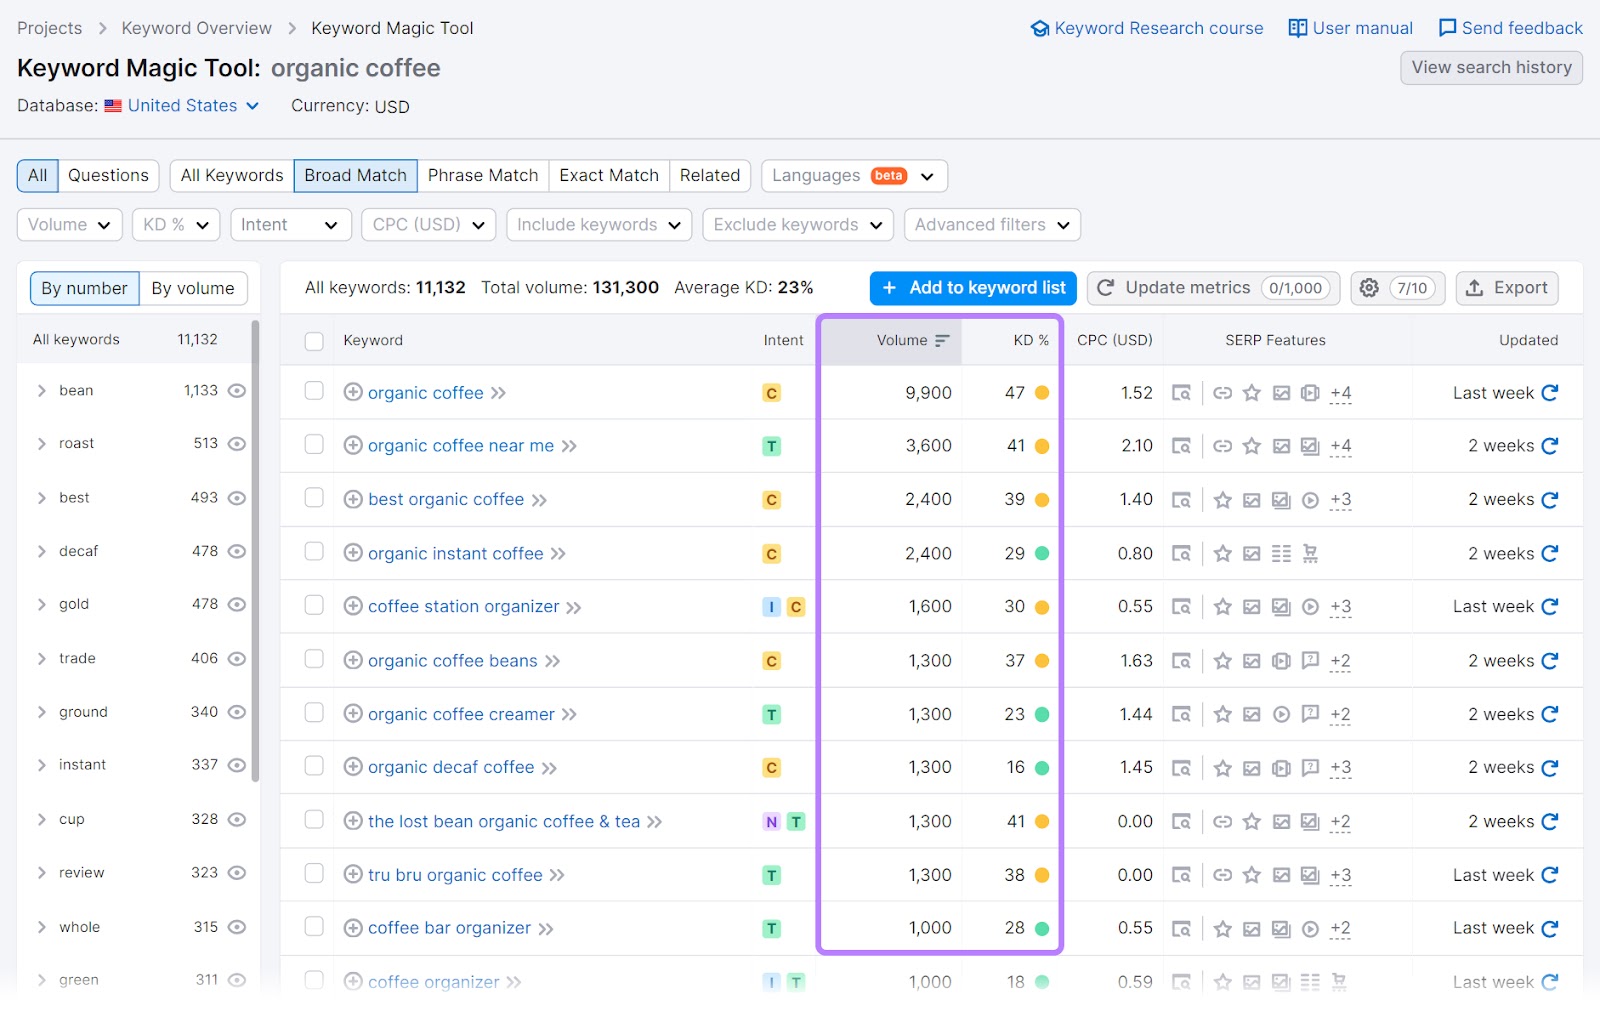 "Volume" and "KD%" columns highlighted successful  Keyword Magic Tool